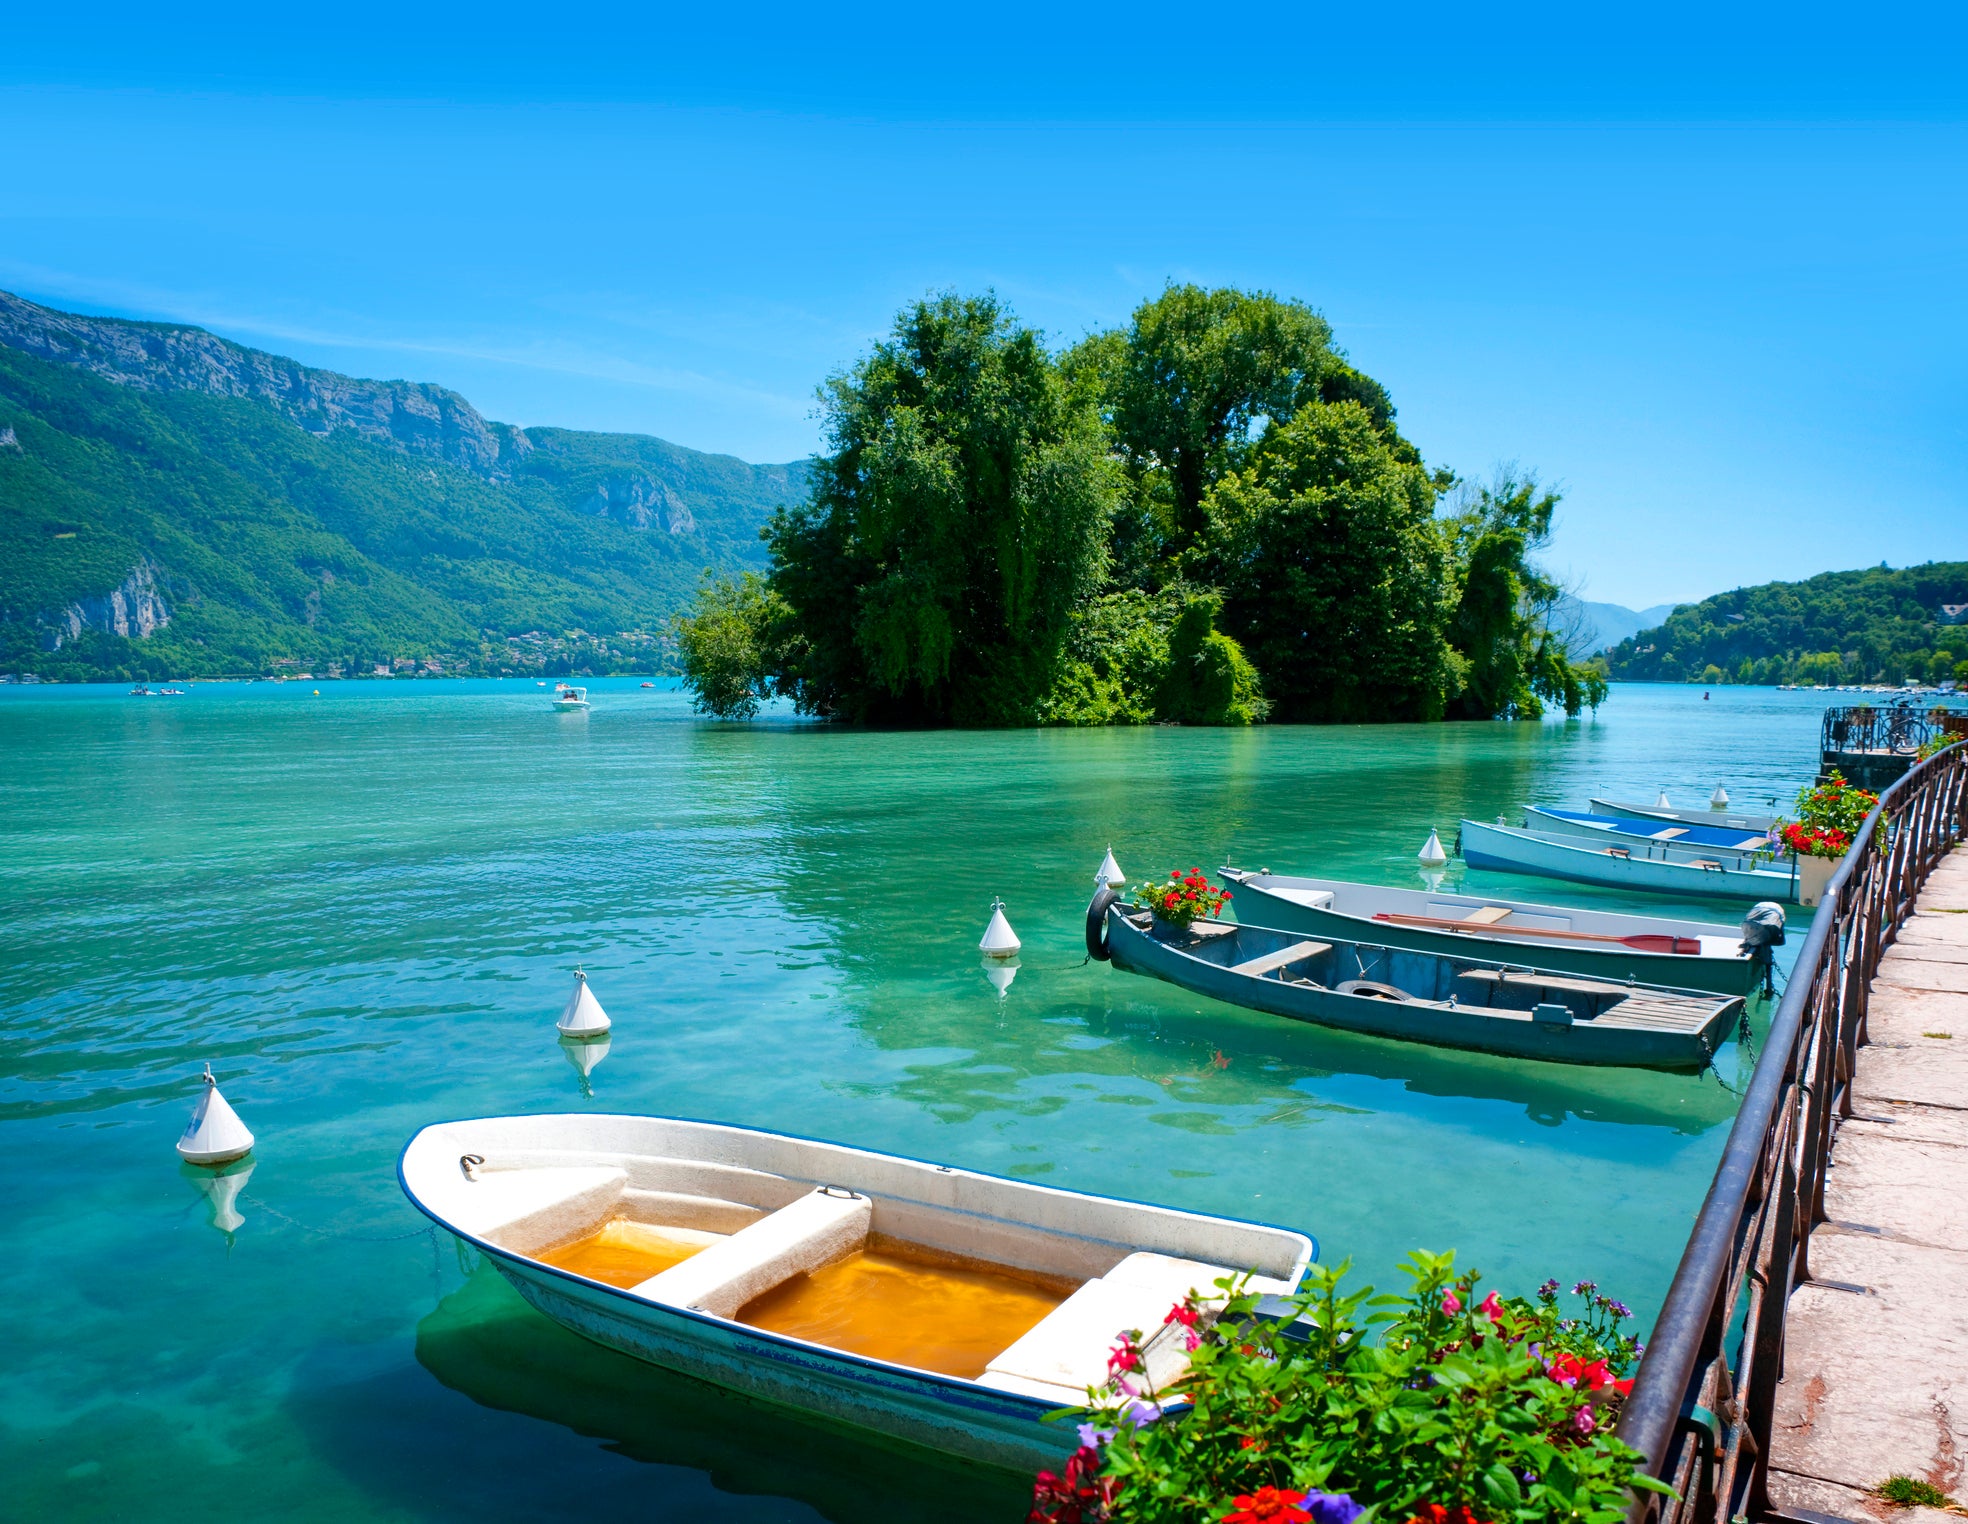 Lake Annecy offers clear water surrounded by mountain views